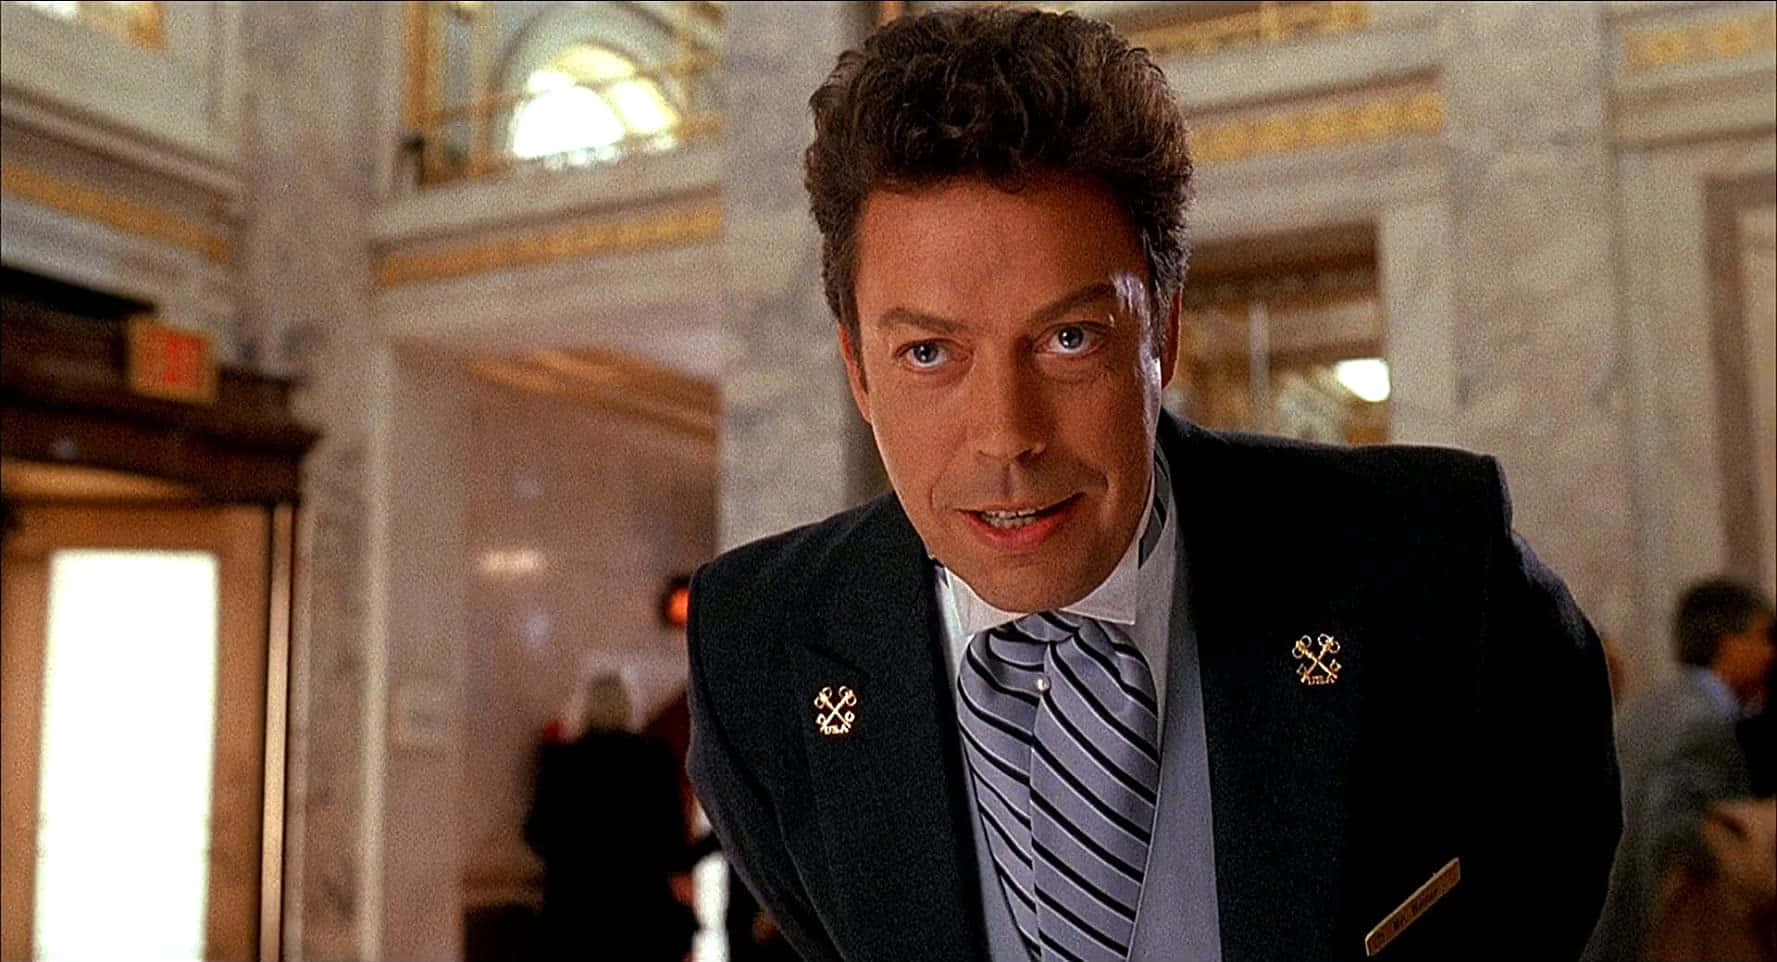 Legendary Actor Tim Curry Smiling in an Iconic Pose Wallpaper